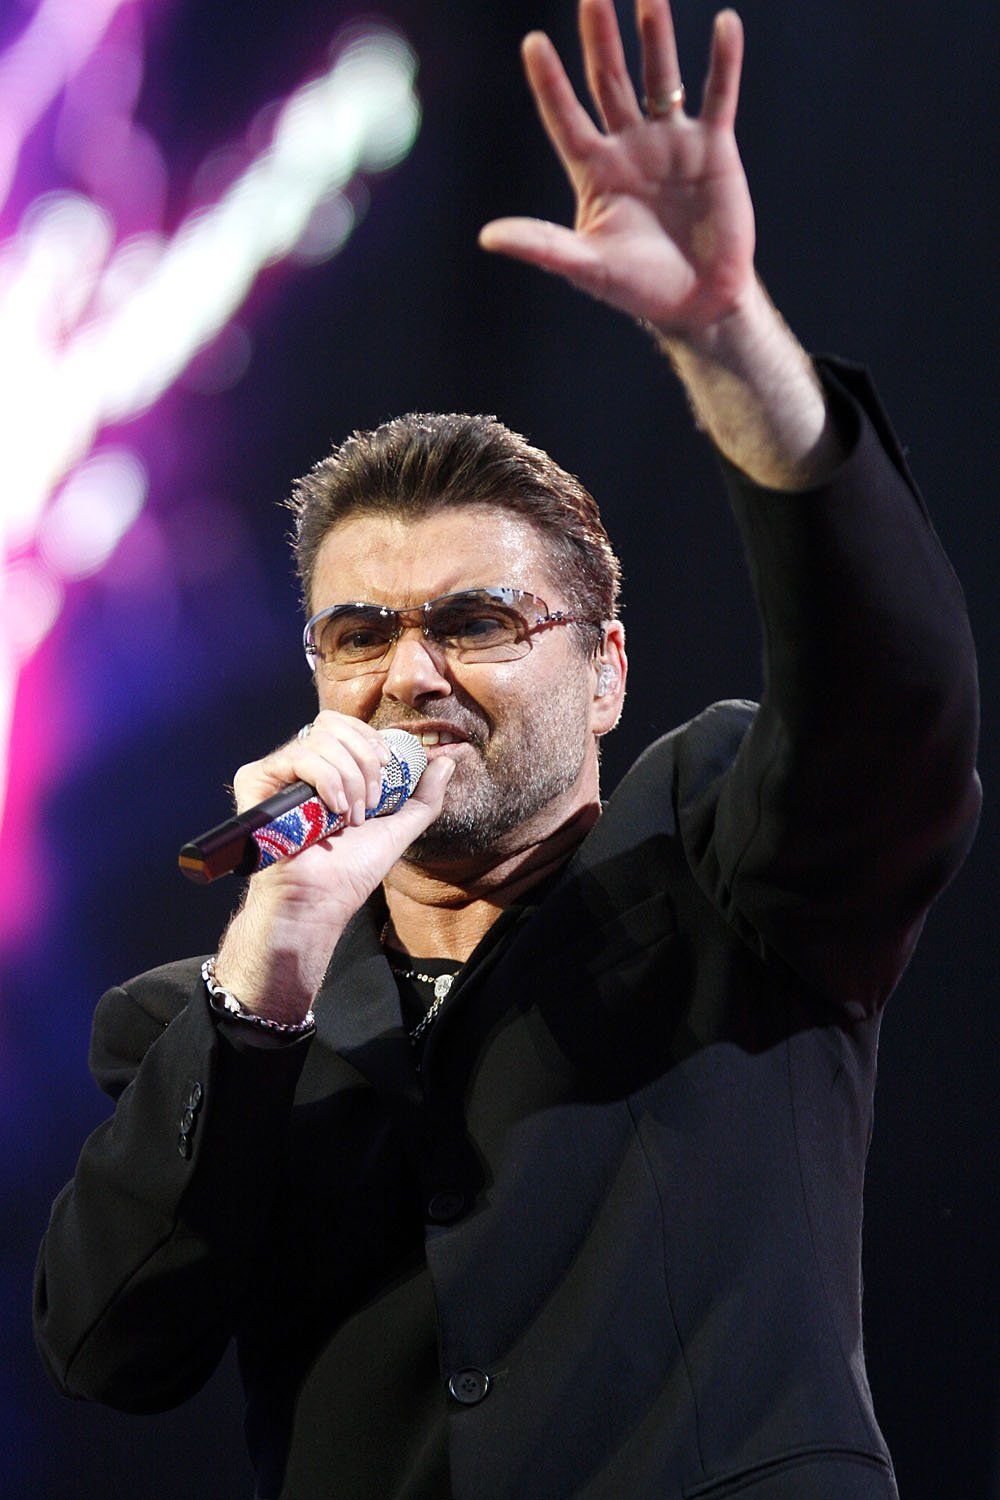 George Michael @ Plymouth Home Park 19th June 2007 - www.leapimages.co.uk